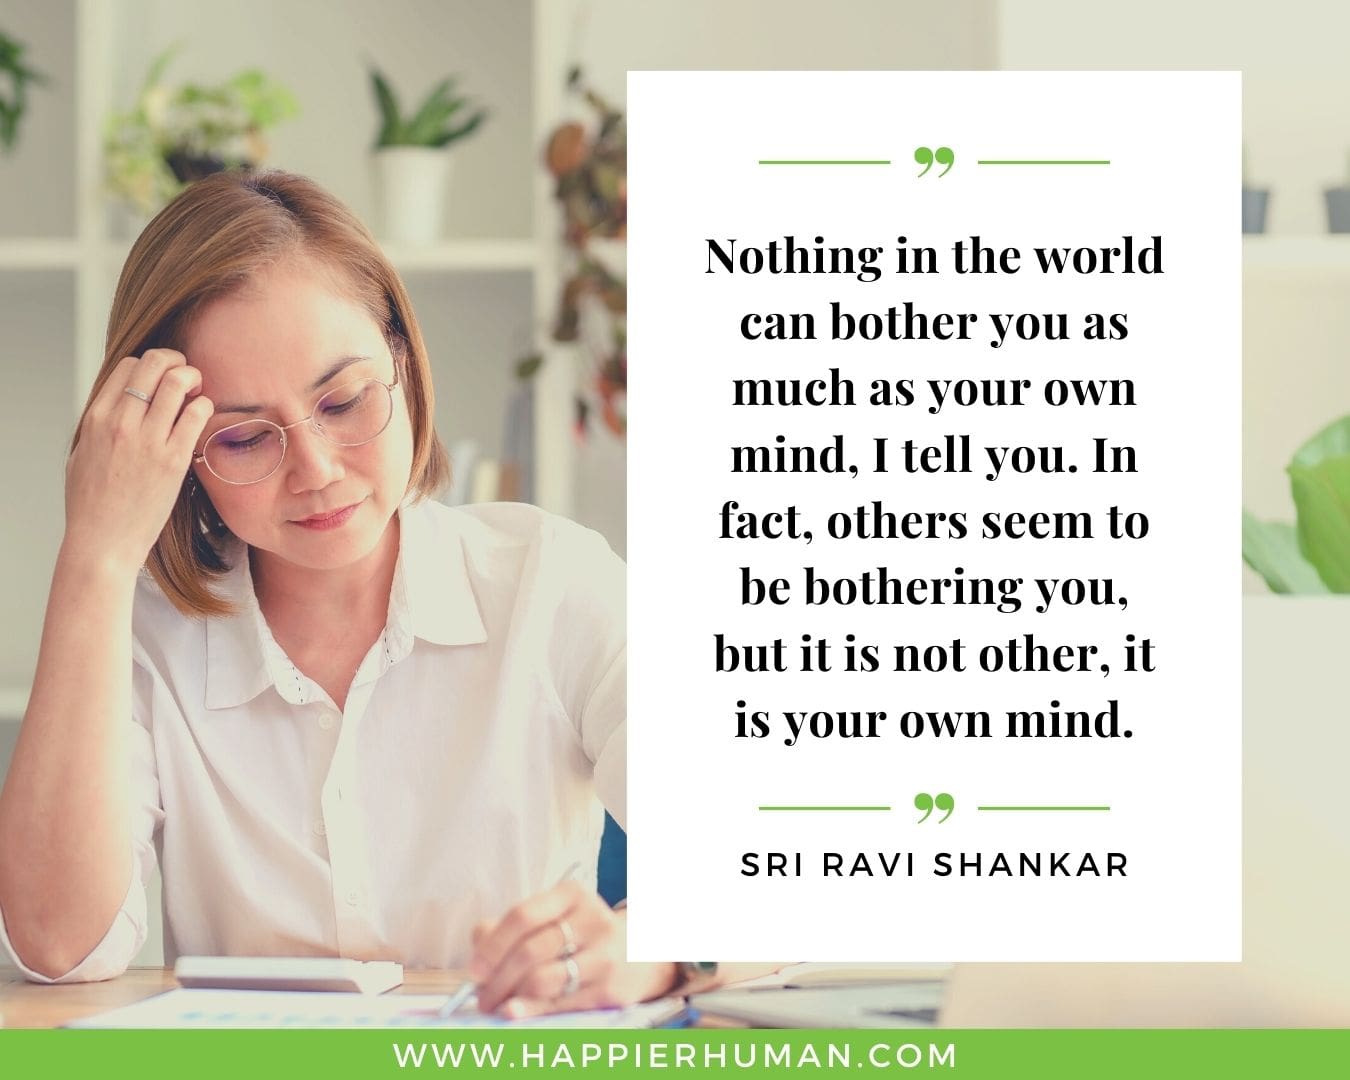 Overthinking Quotes - “Nothing in the world can bother you as much as your own mind, I tell you. In fact, others seem to be bothering you, but it is not other, it is your own mind.” - Sri Ravi Shankar